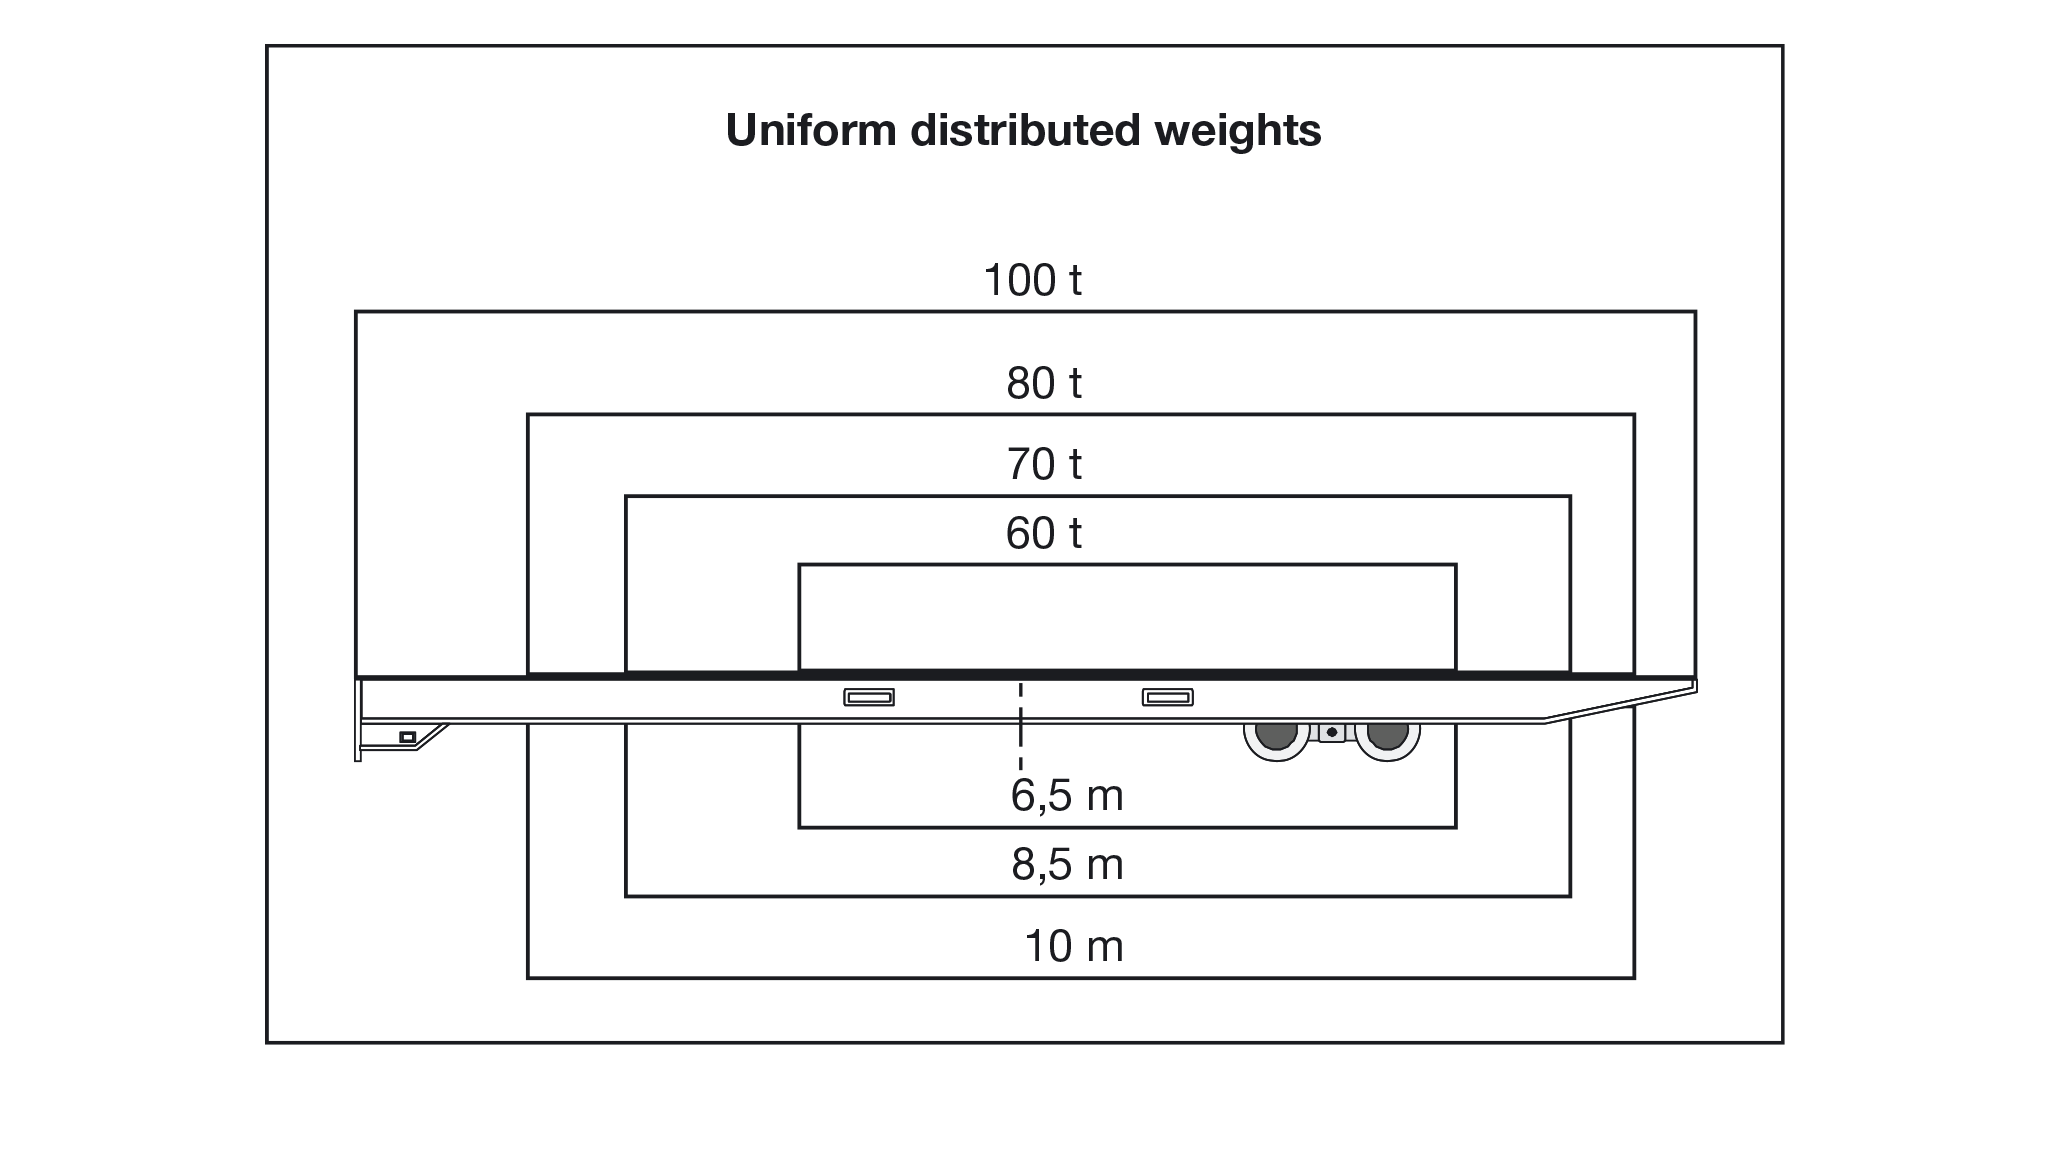 Uniform distributed weights